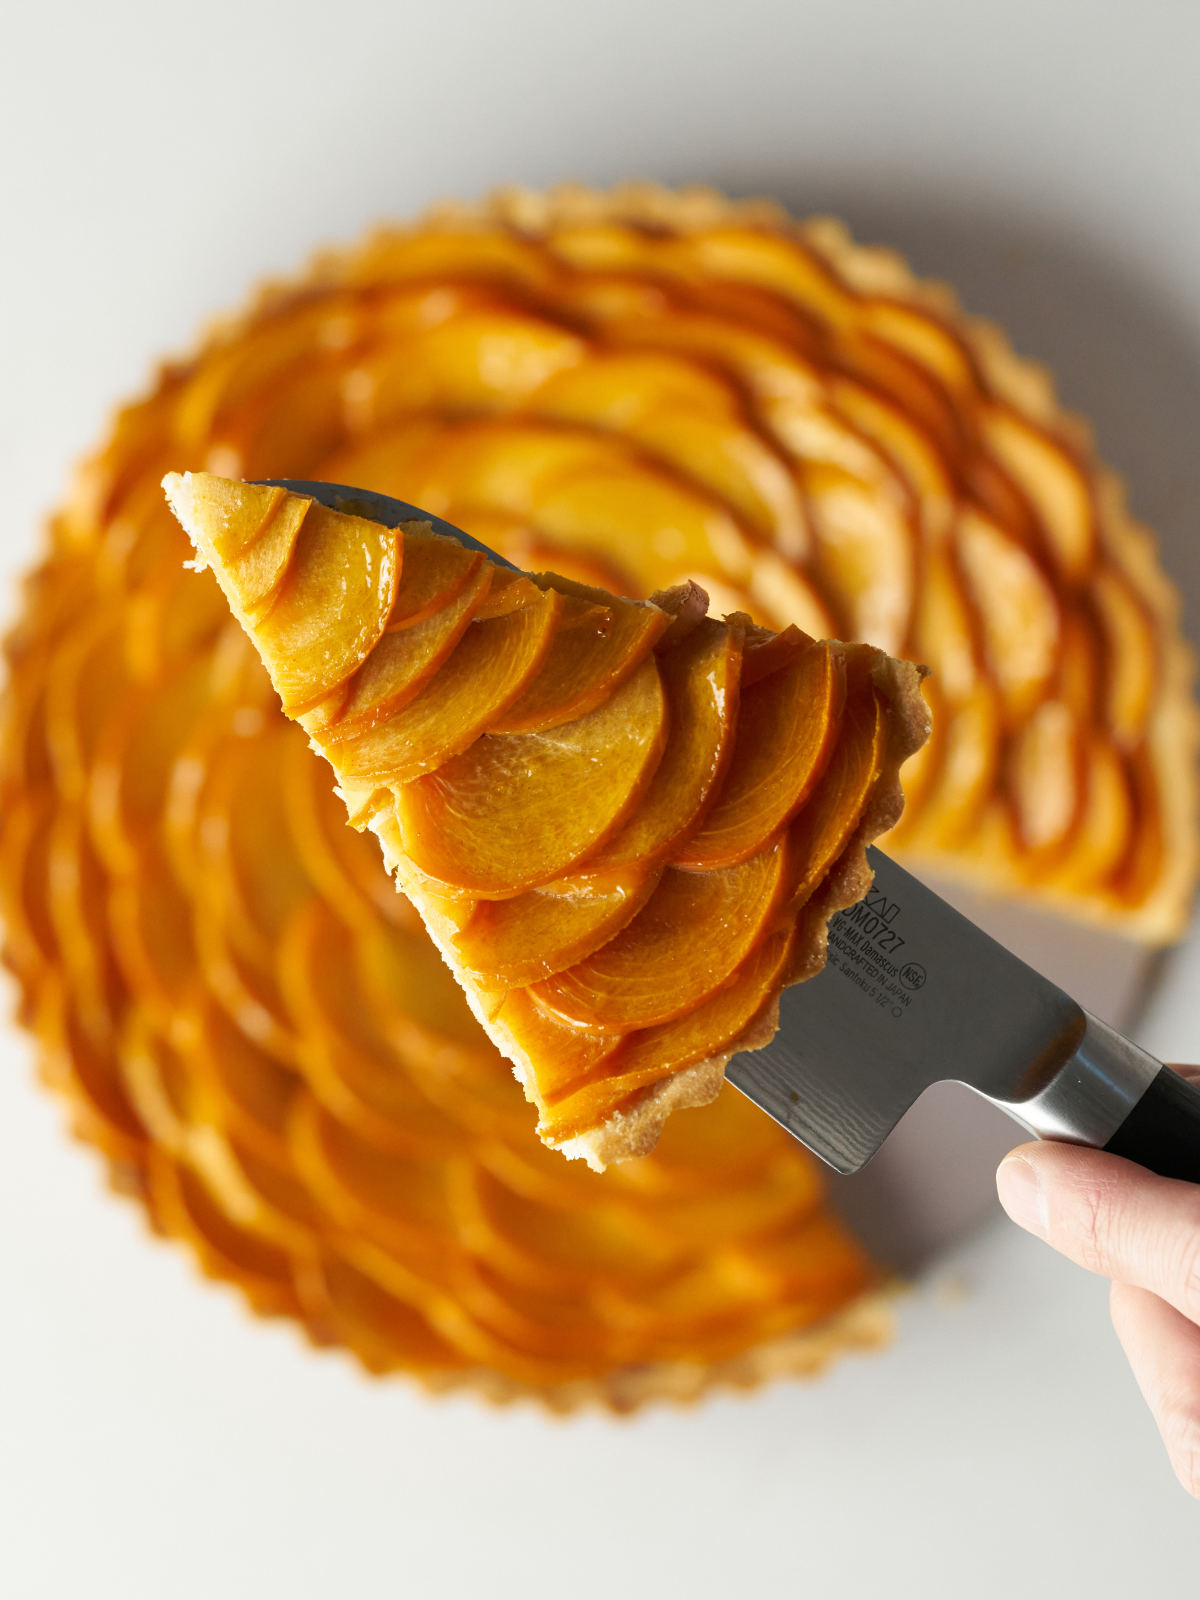 Slice of layered persimmon tart held up on a knife over the rest of the tart.